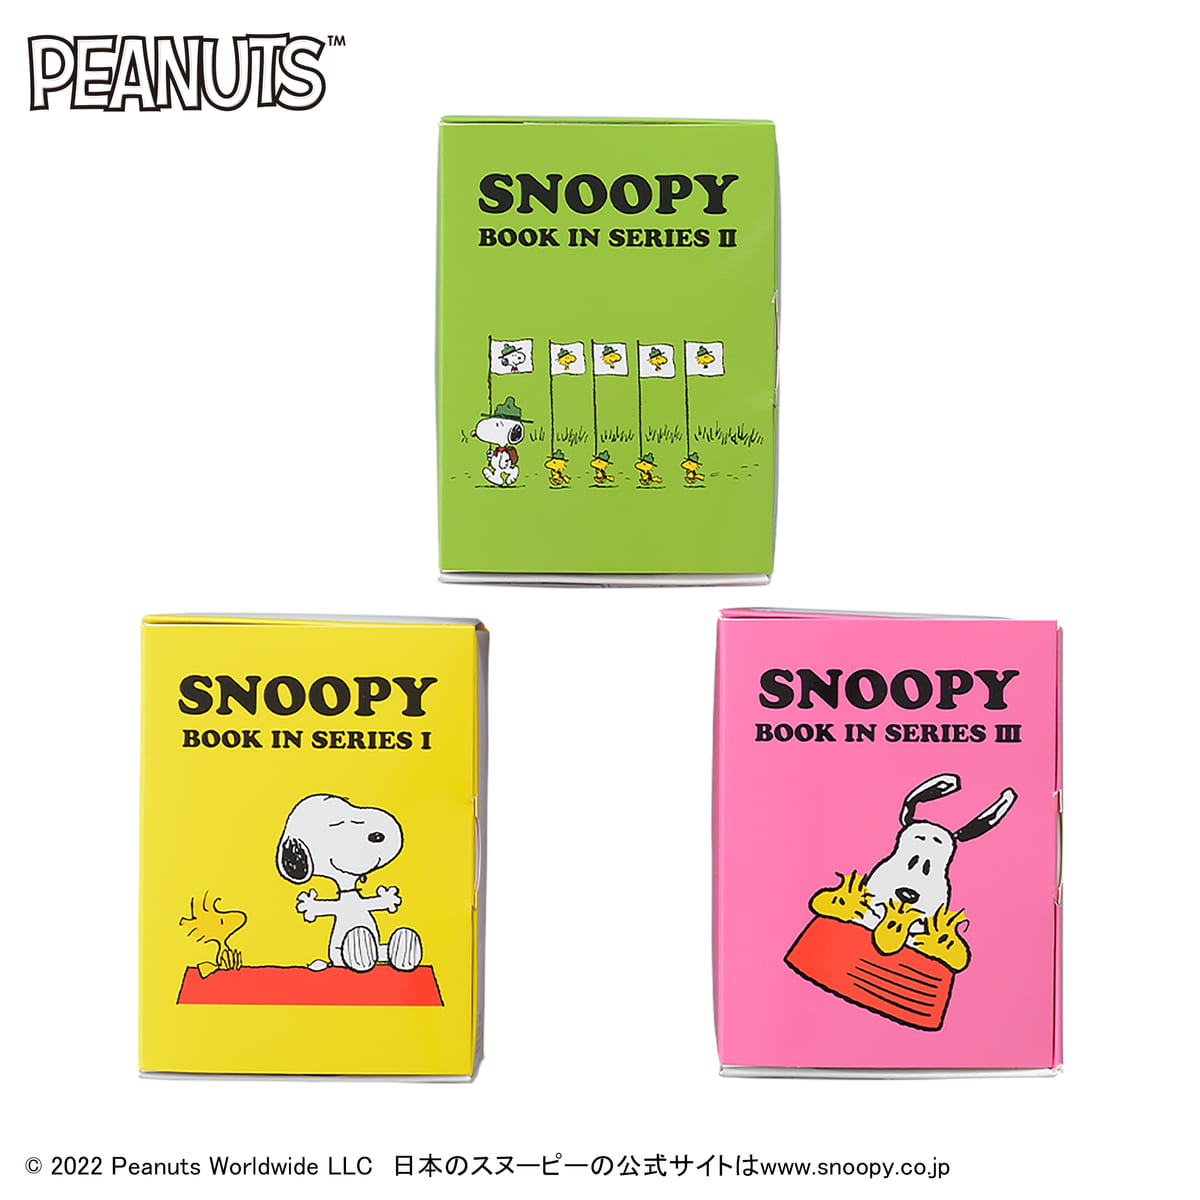 SNOOPY™　BOOK IN SERIES　ミニぬいぐるみ（BOX)